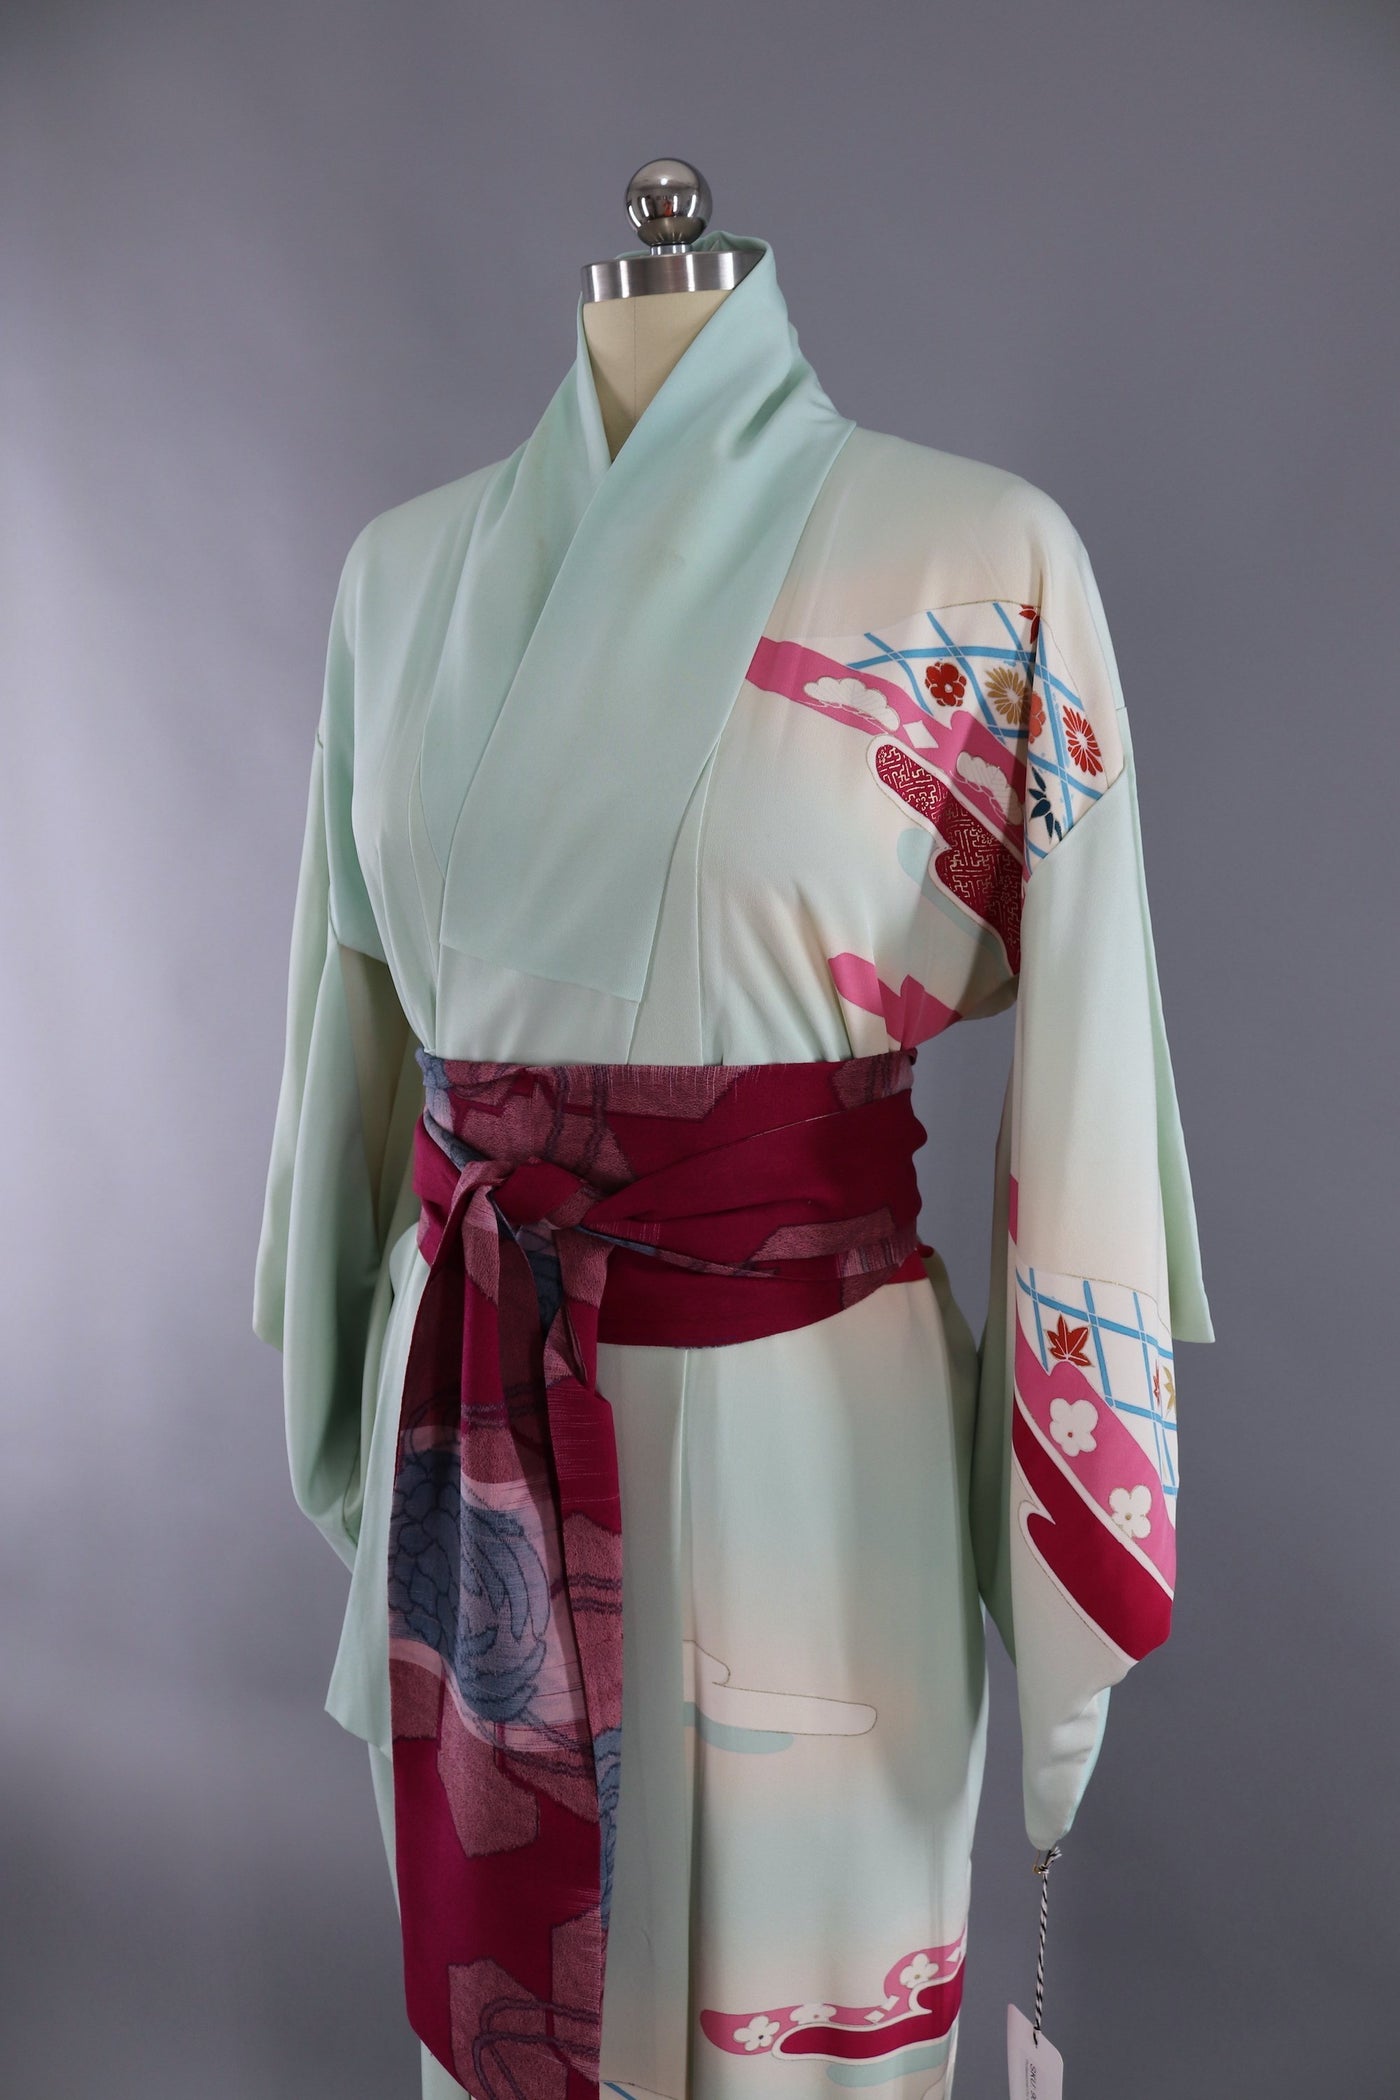 Vintage Silk Kimono Robe - Blue and Pink Floral Clouds - ThisBlueBird